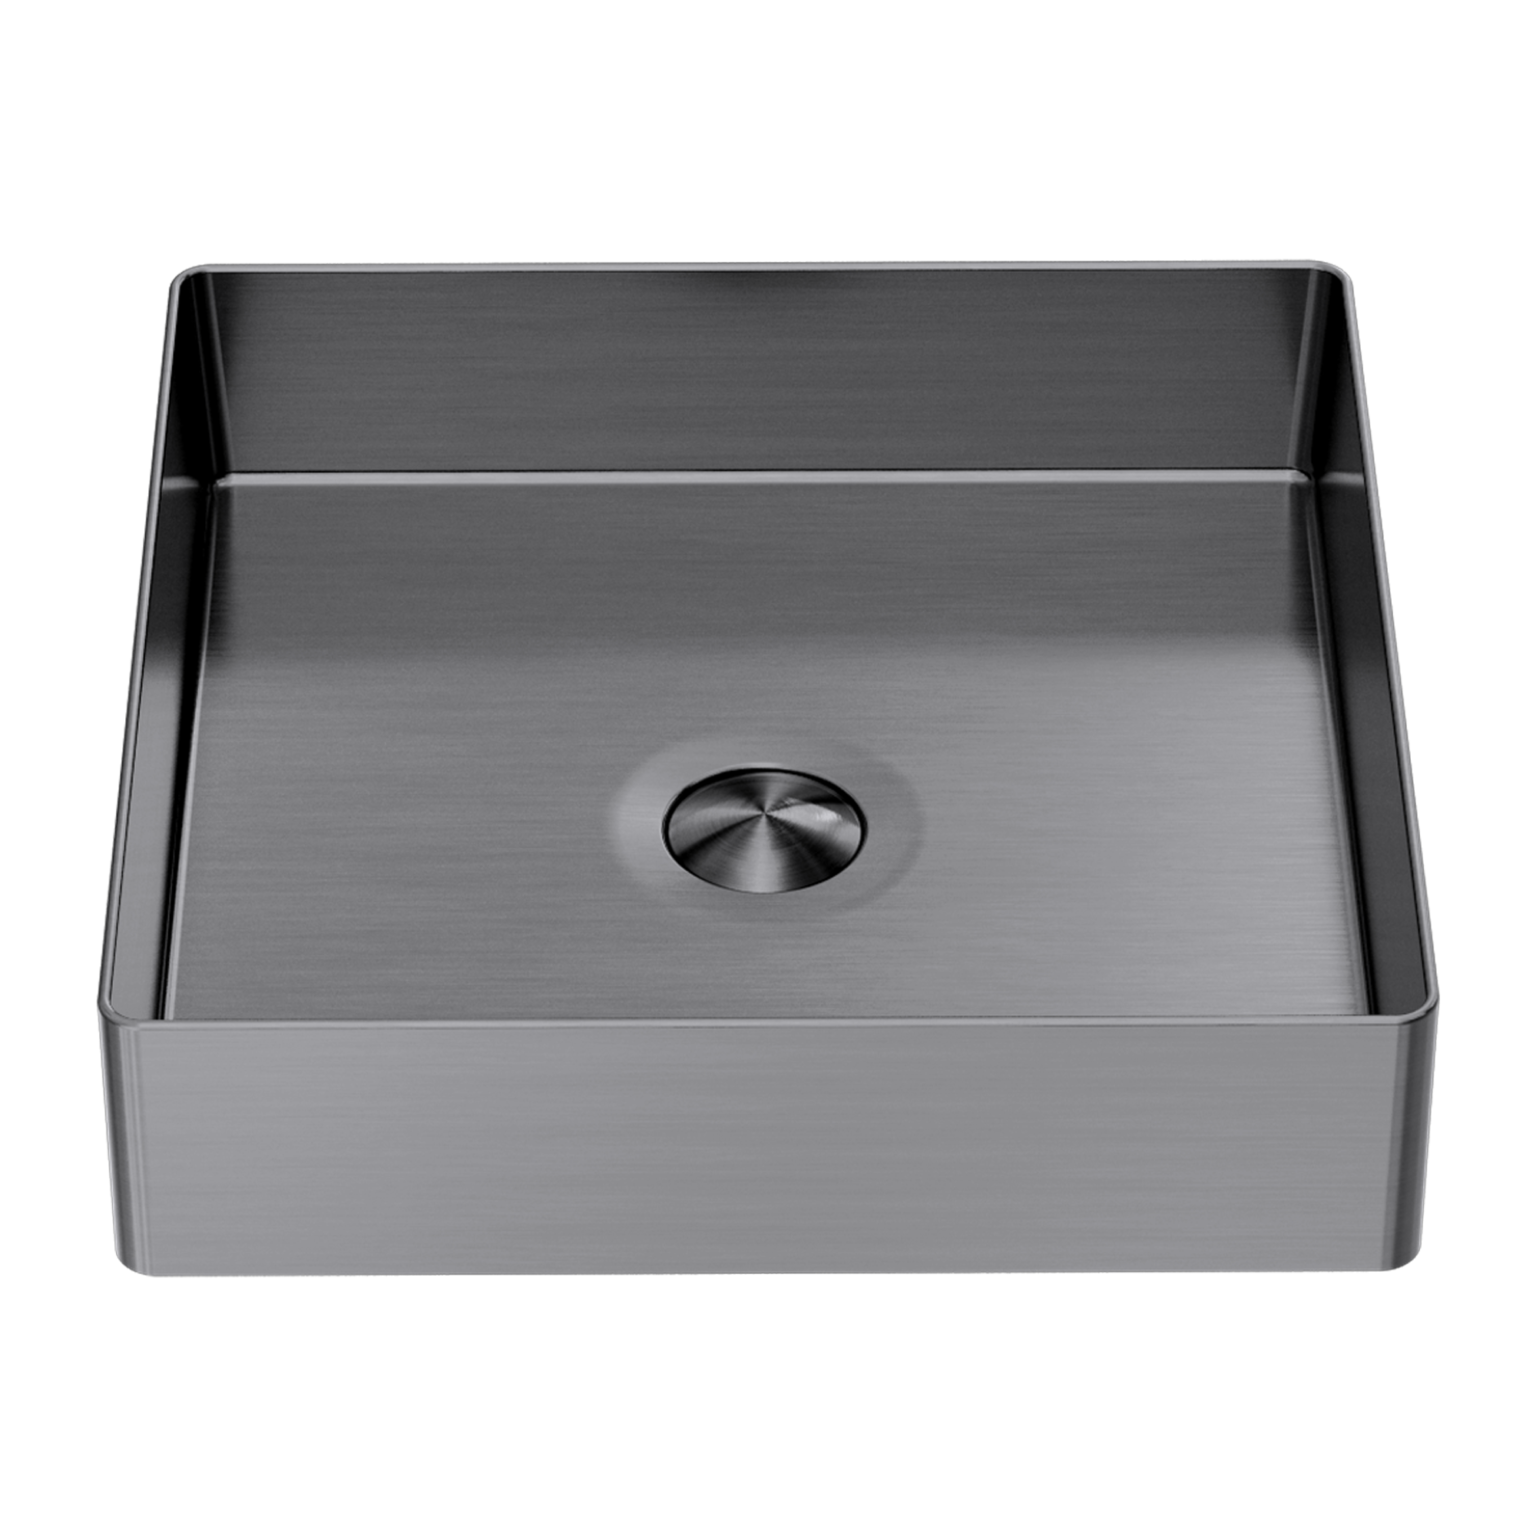 Square Stainless Steel Basin